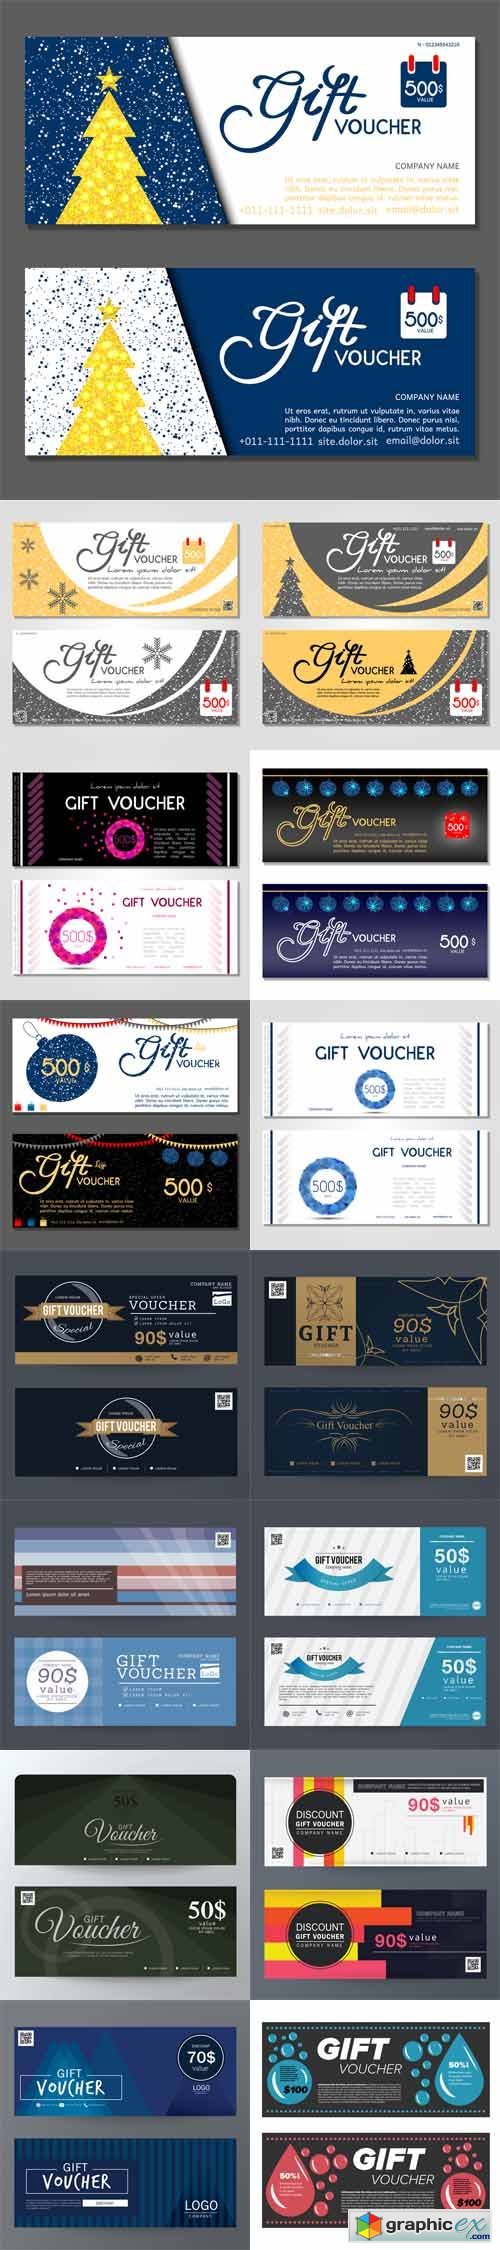 Gift Voucher Illustrations. Card Templates